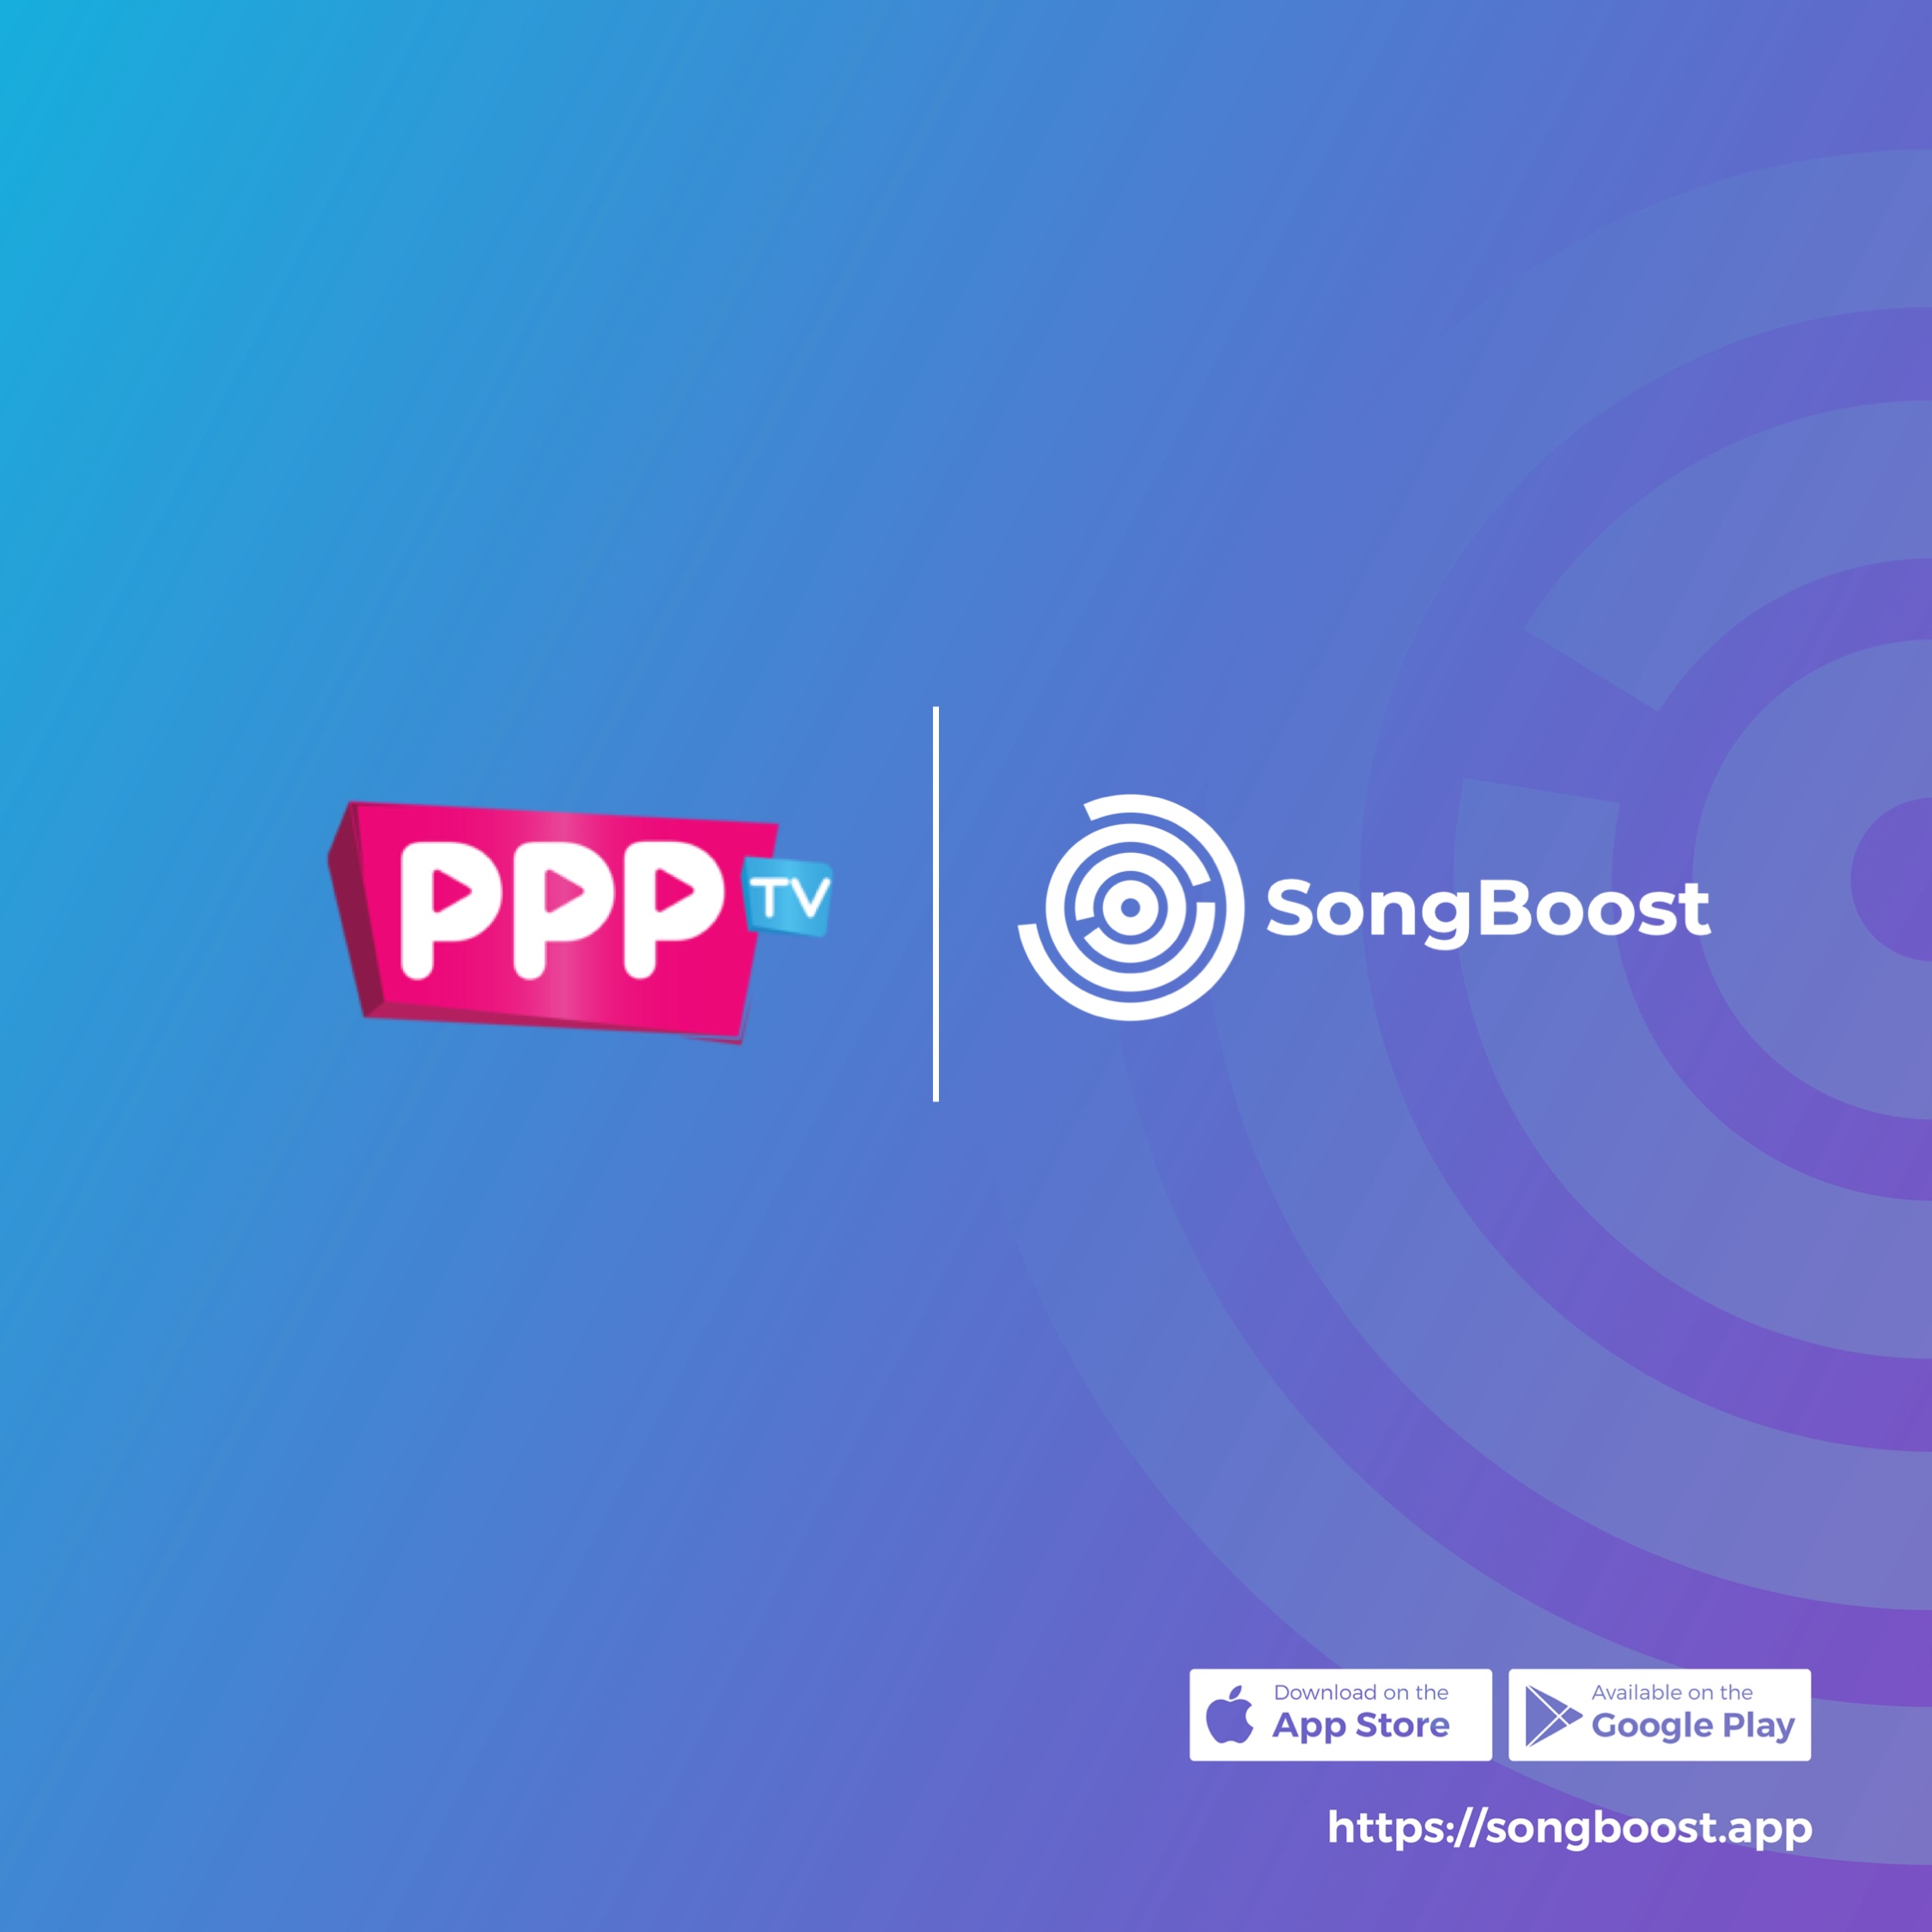 PPP TV Now Monitored on the SongBoost App